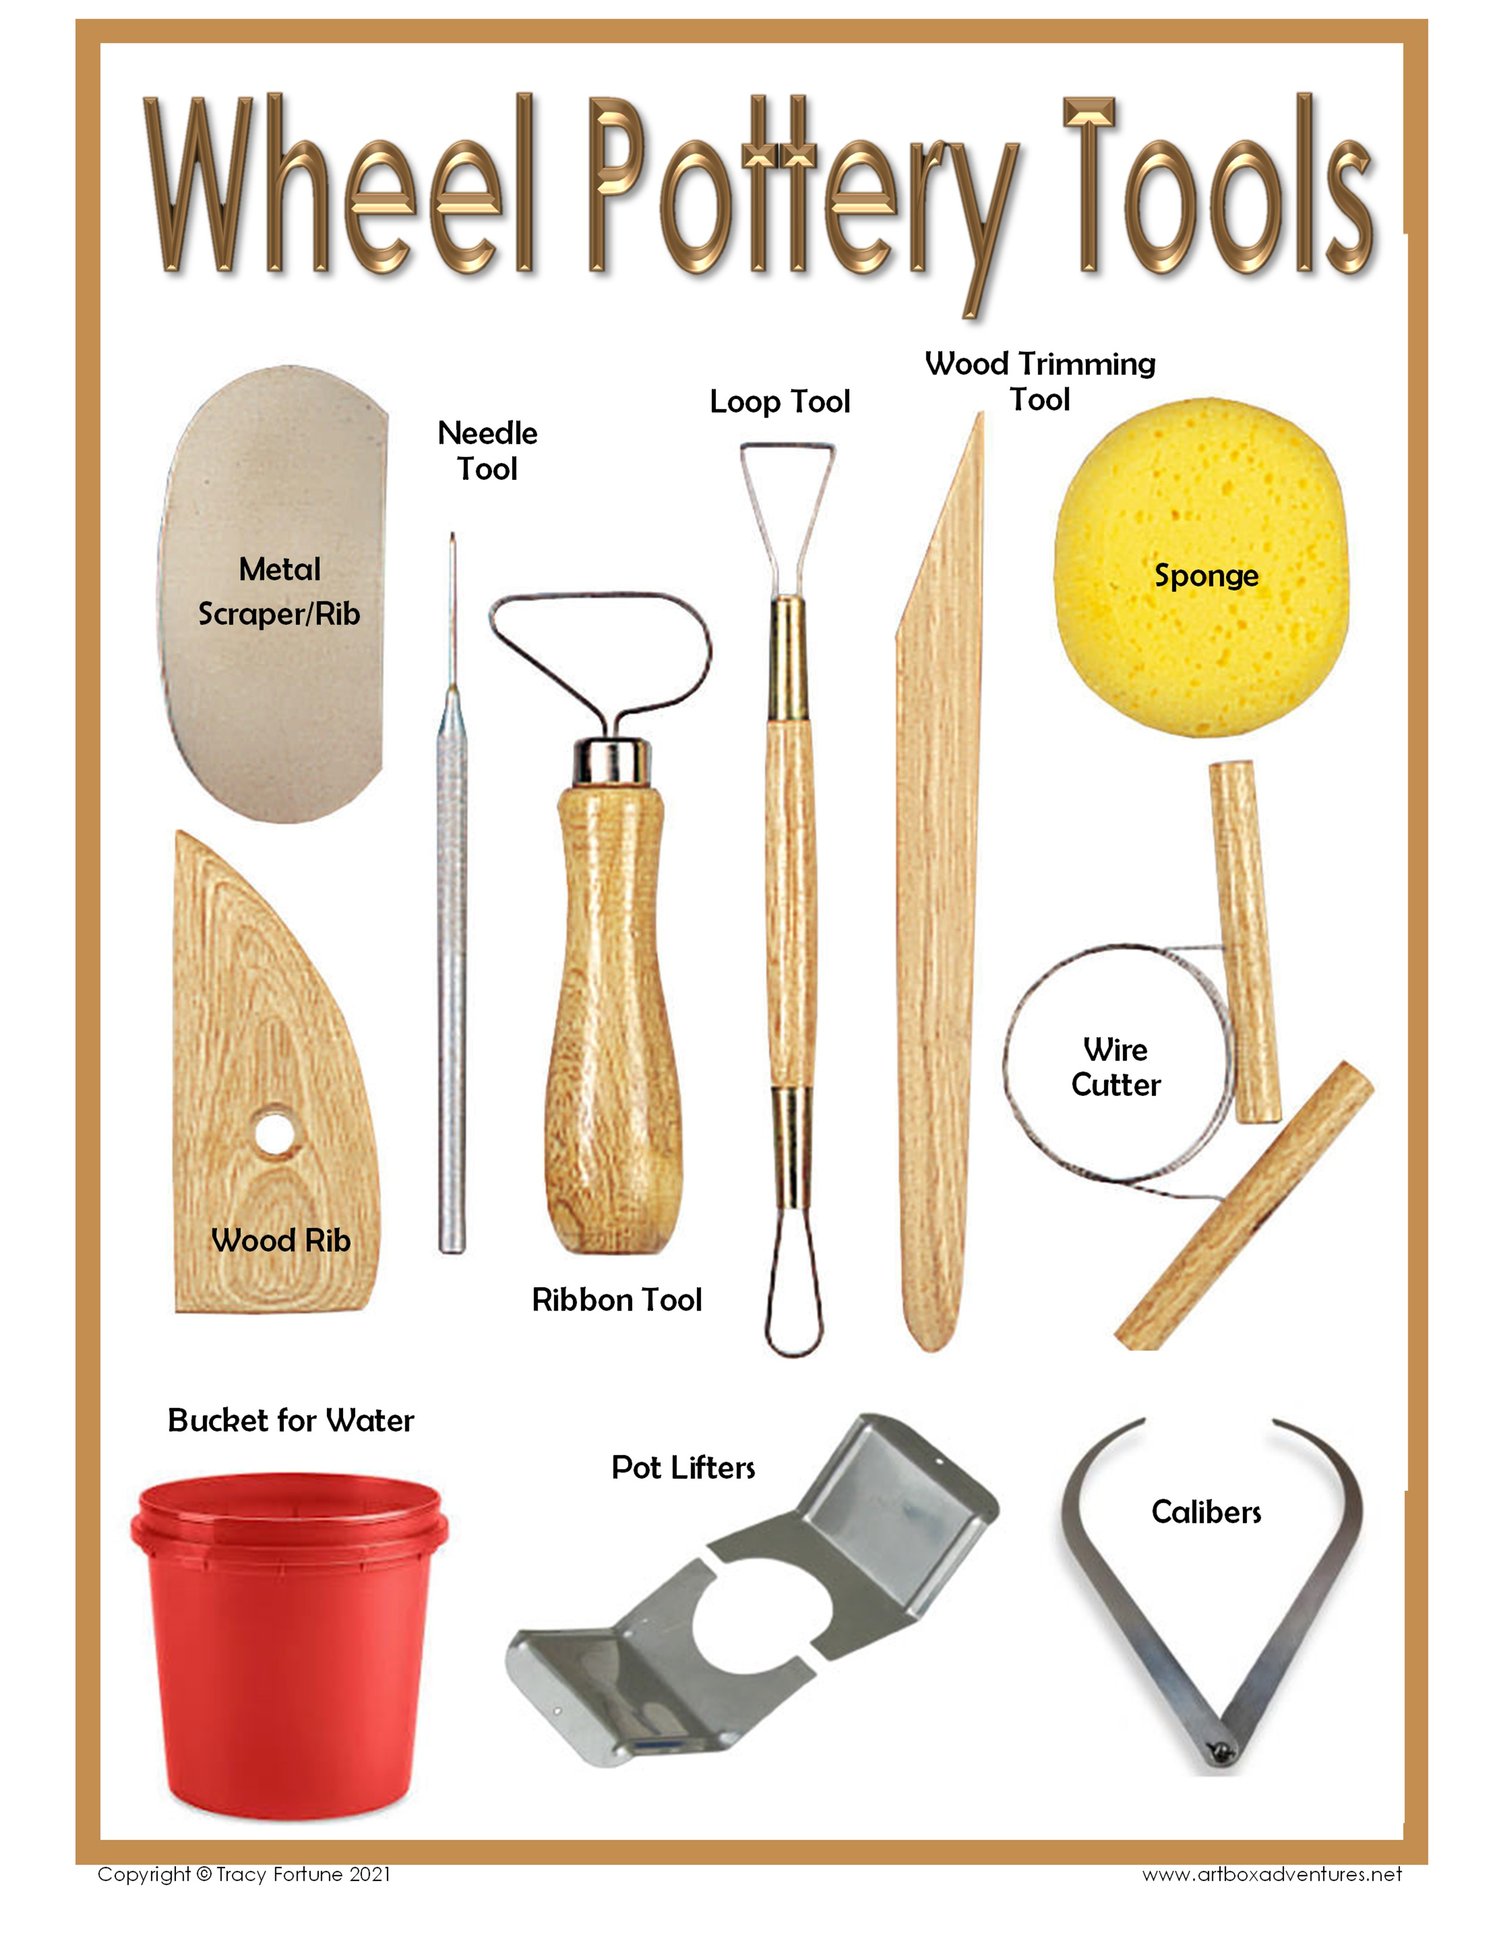 Wheel Pottery Tools Poster - Payhip